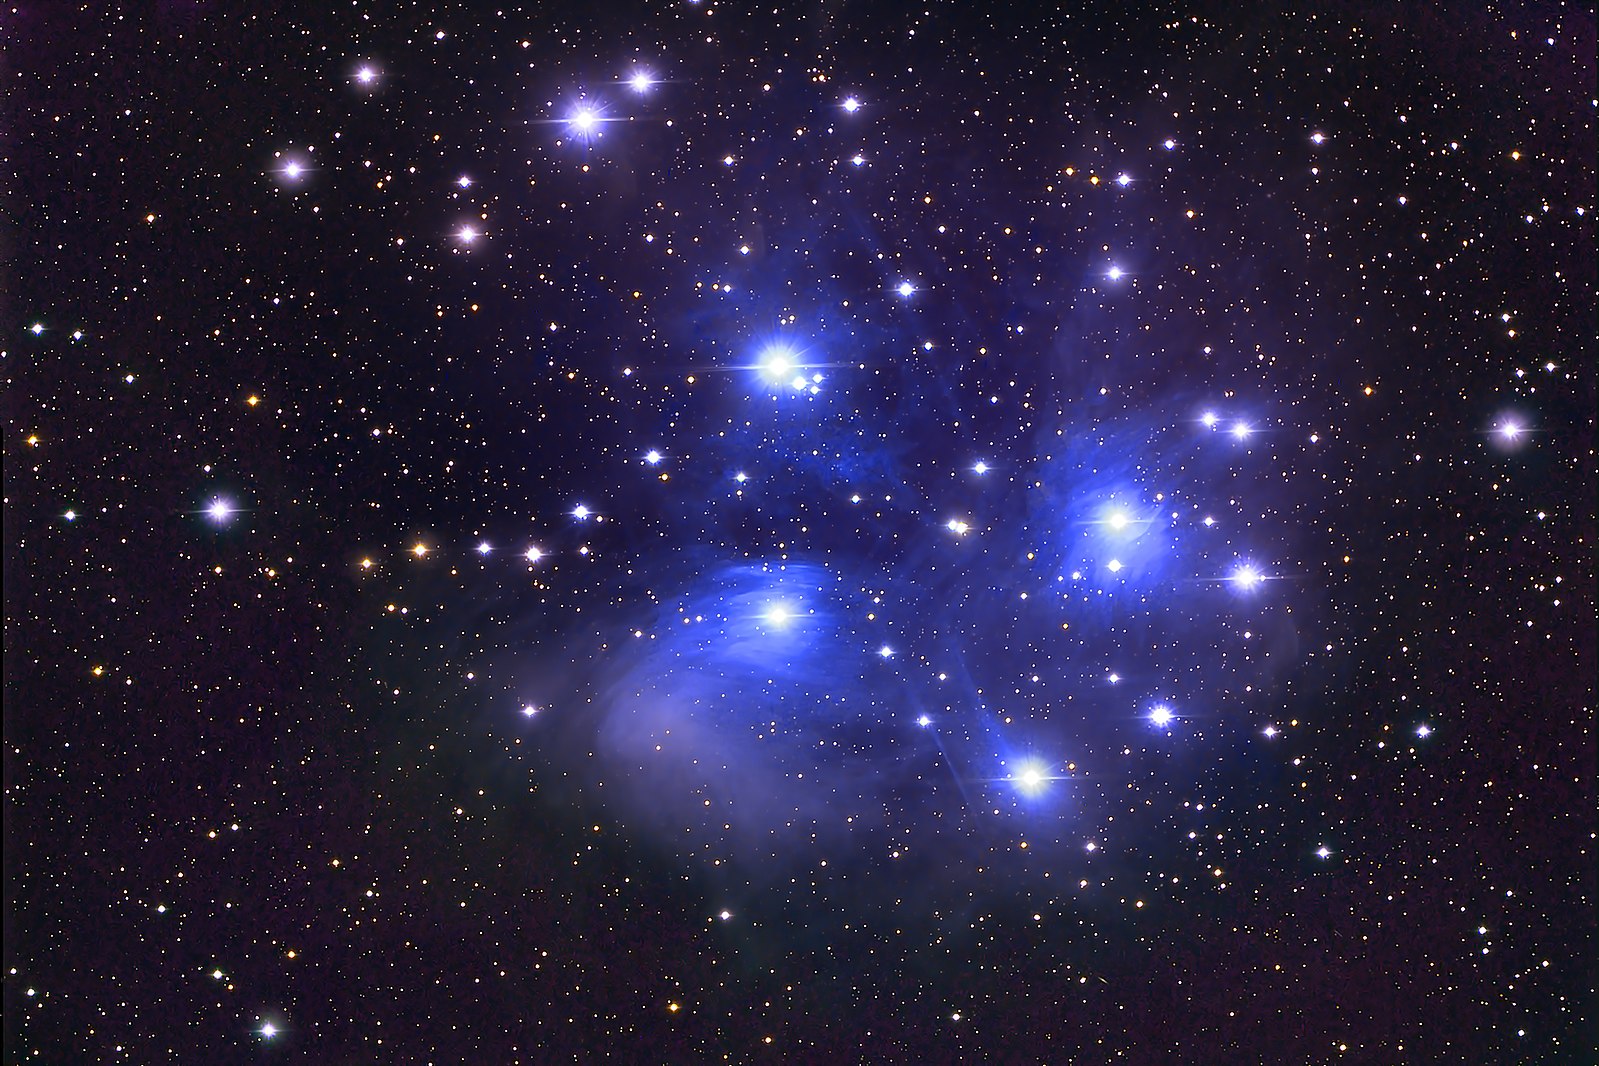 An image of the Pleiades, a young association of stars. (Credit: D. O'Donnell)